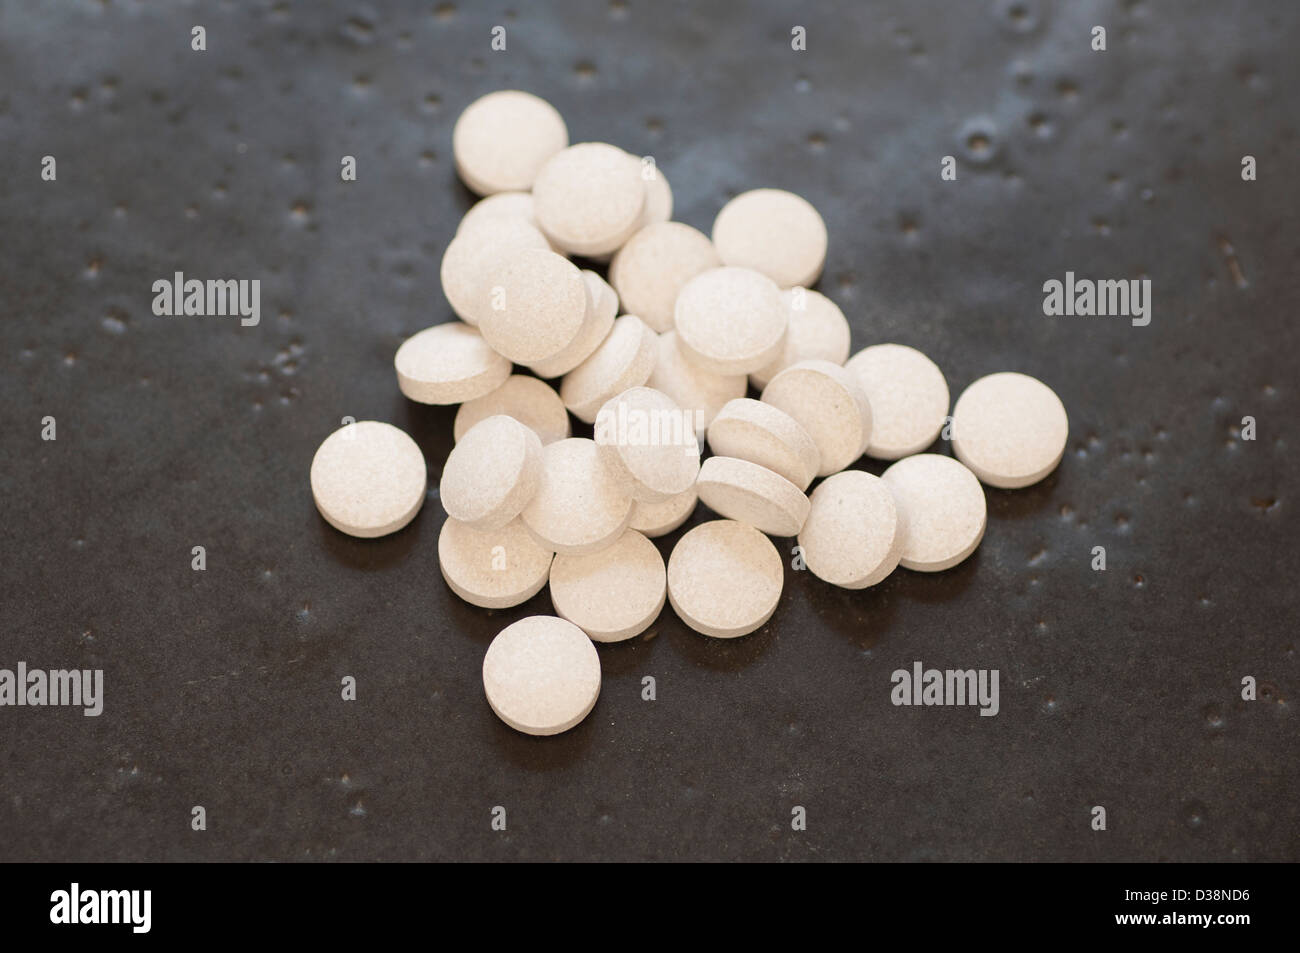 Close-up view of Magnesium pills dietary supplement Stock Photo